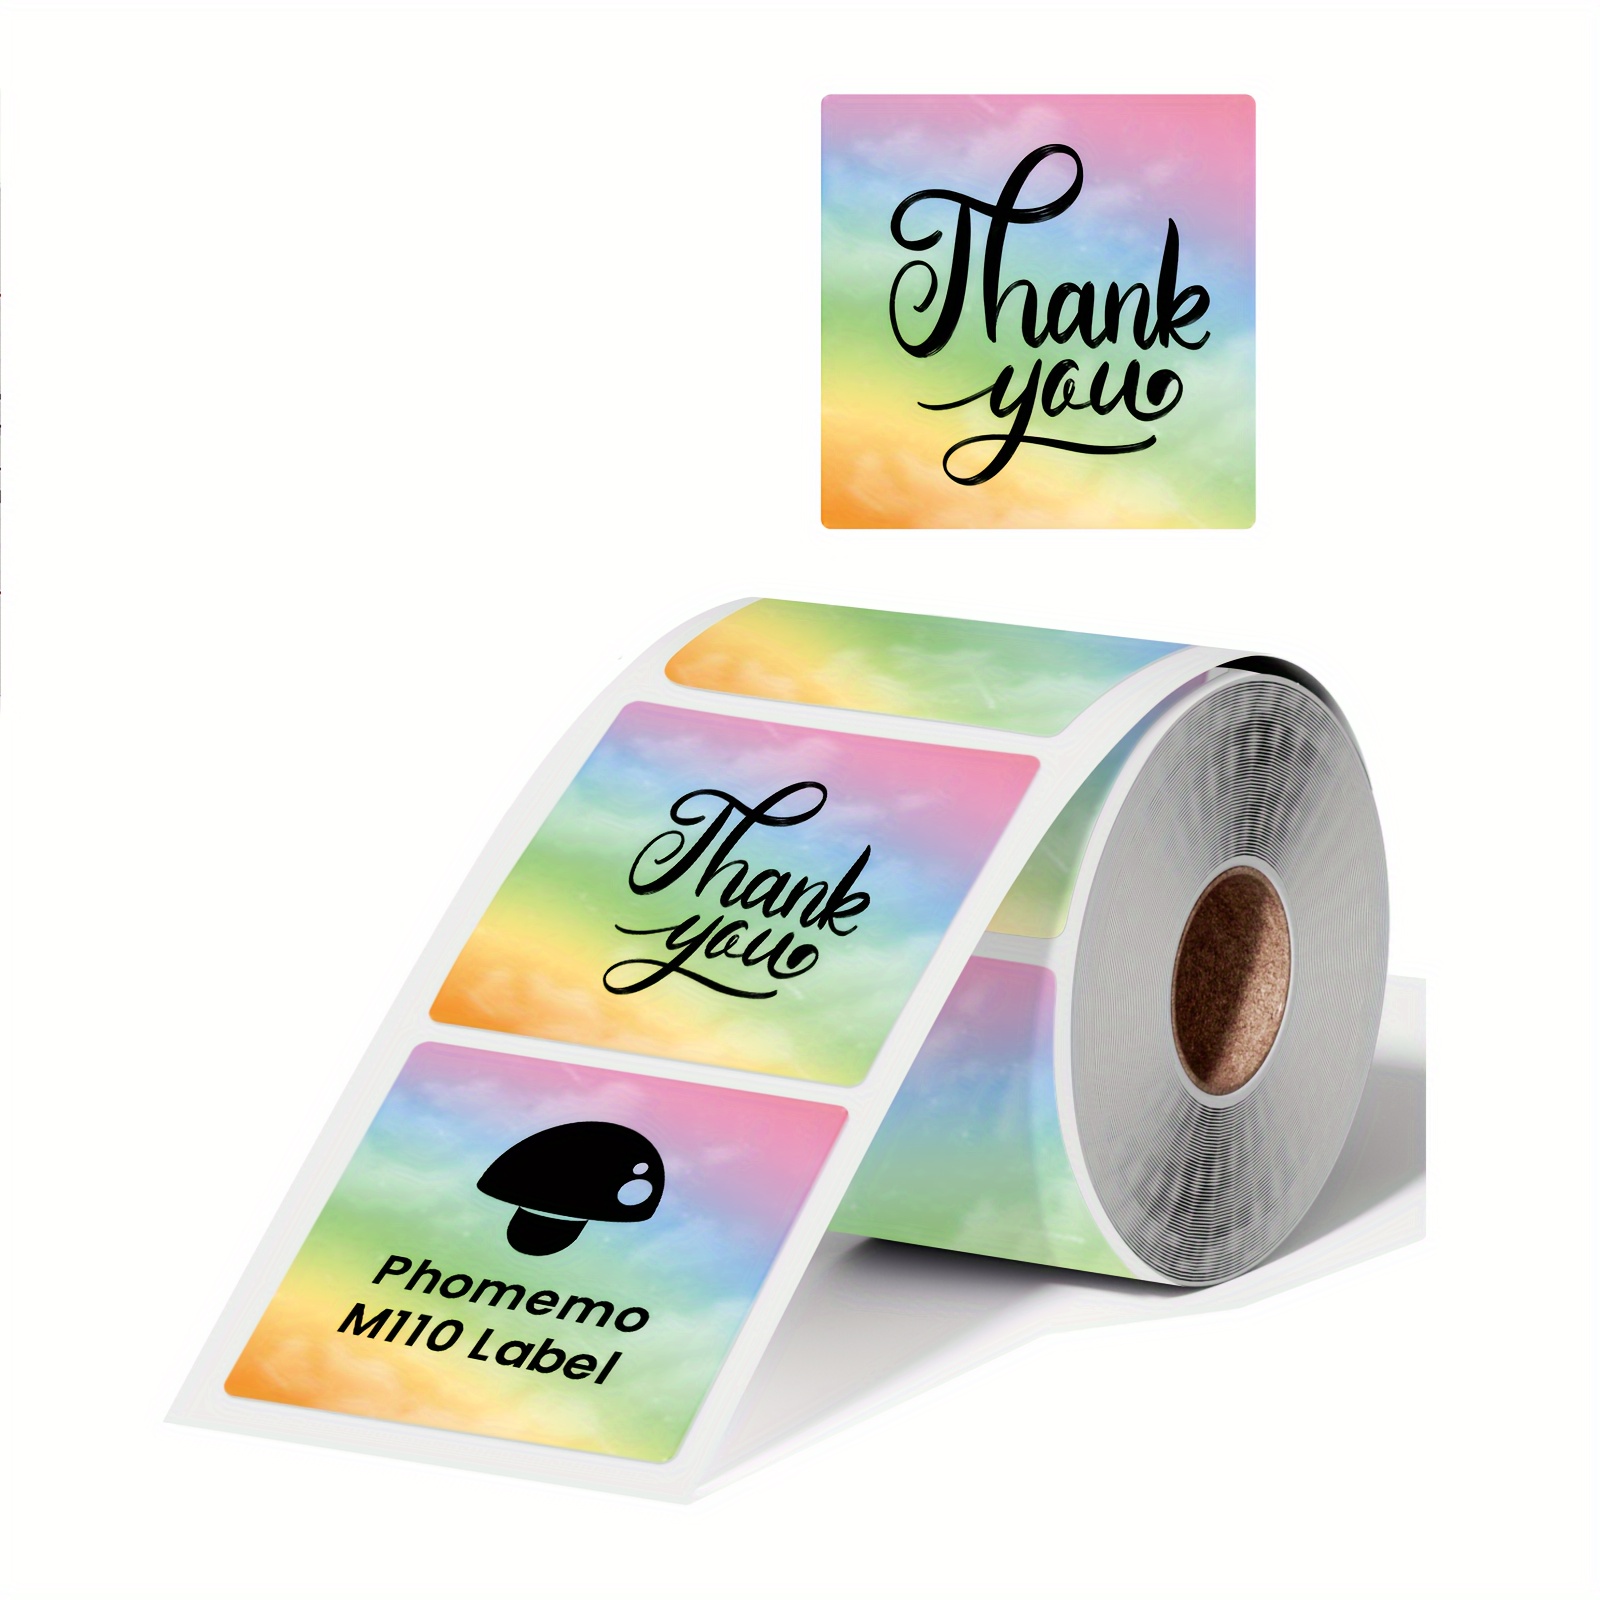 

500pcs Labels/roll Phomemo 2" Color Thermal Labels For Thermal Sticker Label For 241-bt/246s/d520-bt Shipping Printer - Rainbow Color Personalized Stickers Labels For Small Business Supplies